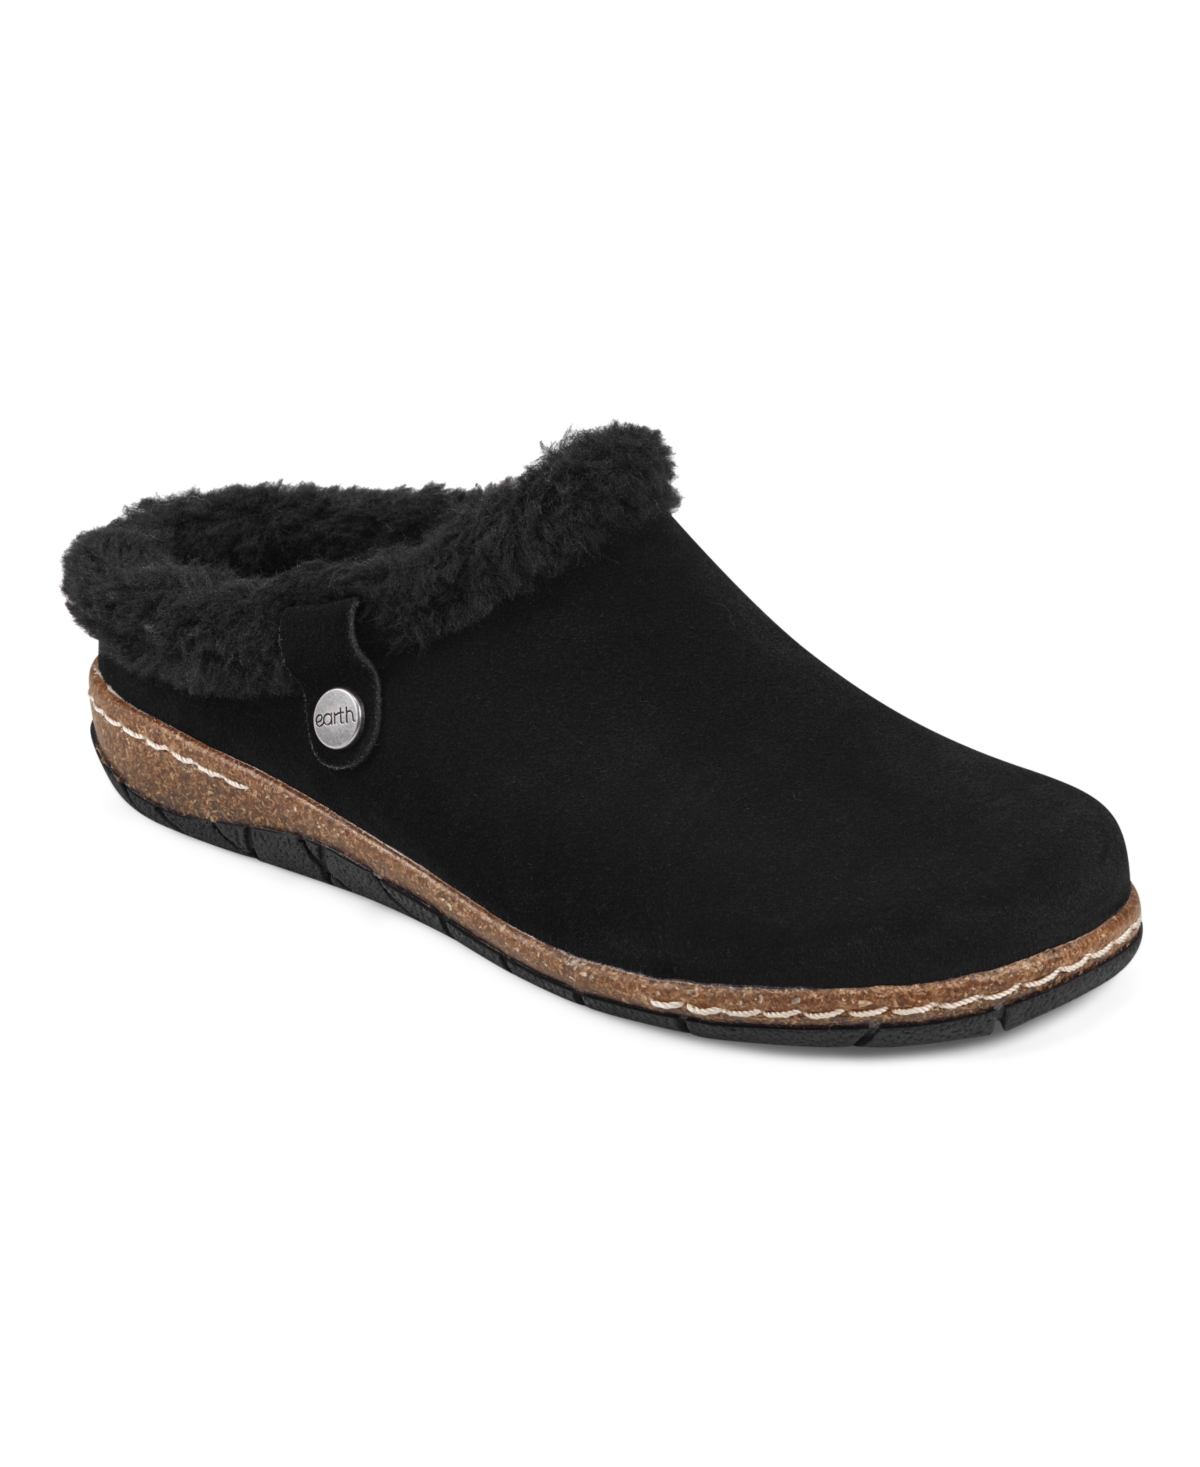 Earth Women's Elena Cold Weather Round Toe Casual Slip On Clogs In Black Suede,faux Fur